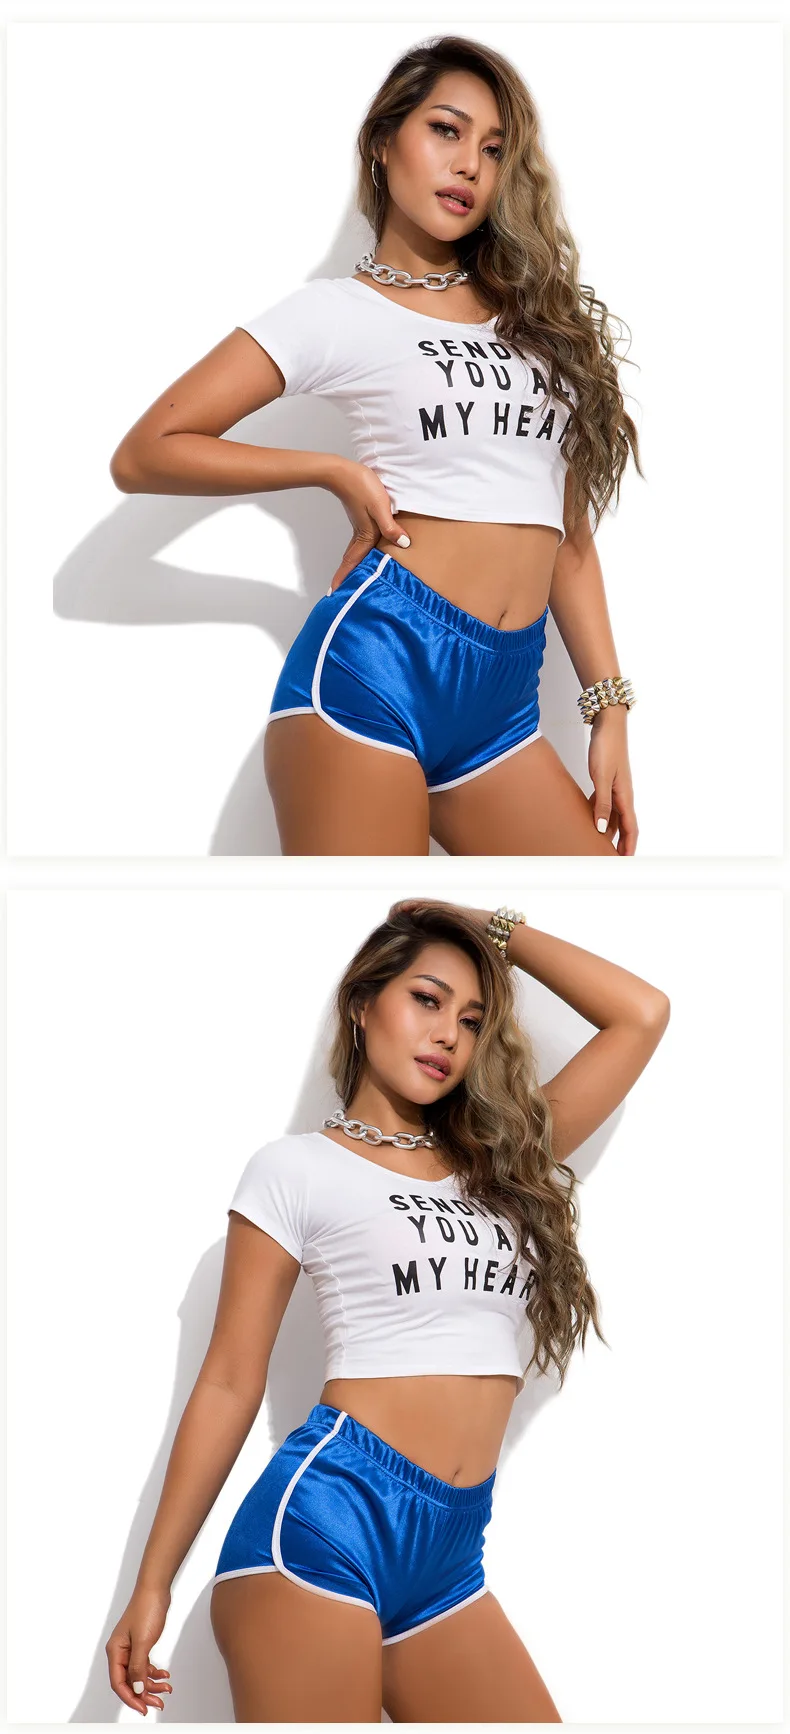 Echoine 2021 Summer Women Sexy Mini Casual Home Shorts Lady Fashion Workout fitness Sport Beach Hot Solid Soft Shorts hotpants